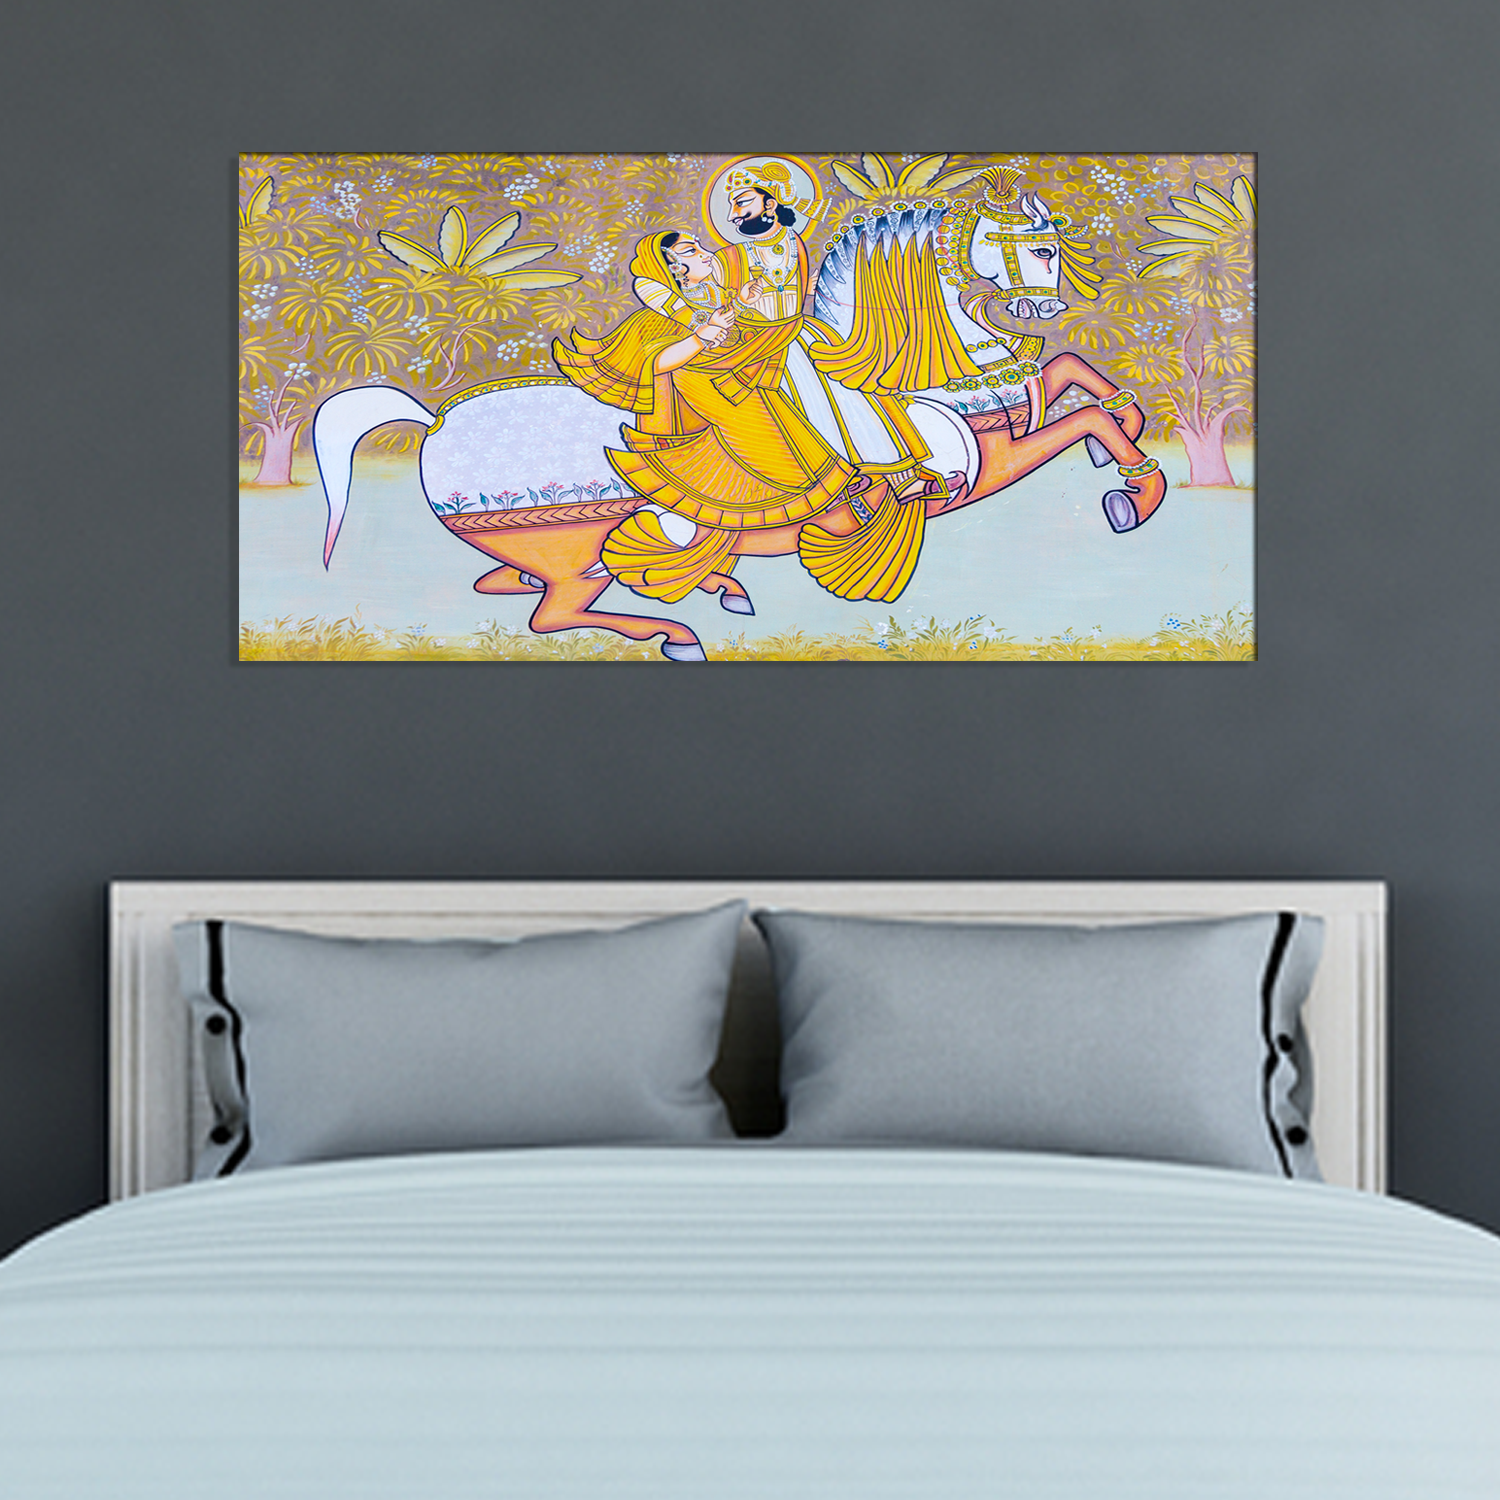 King and Queen Modern Art Canvas Print Wall Painting